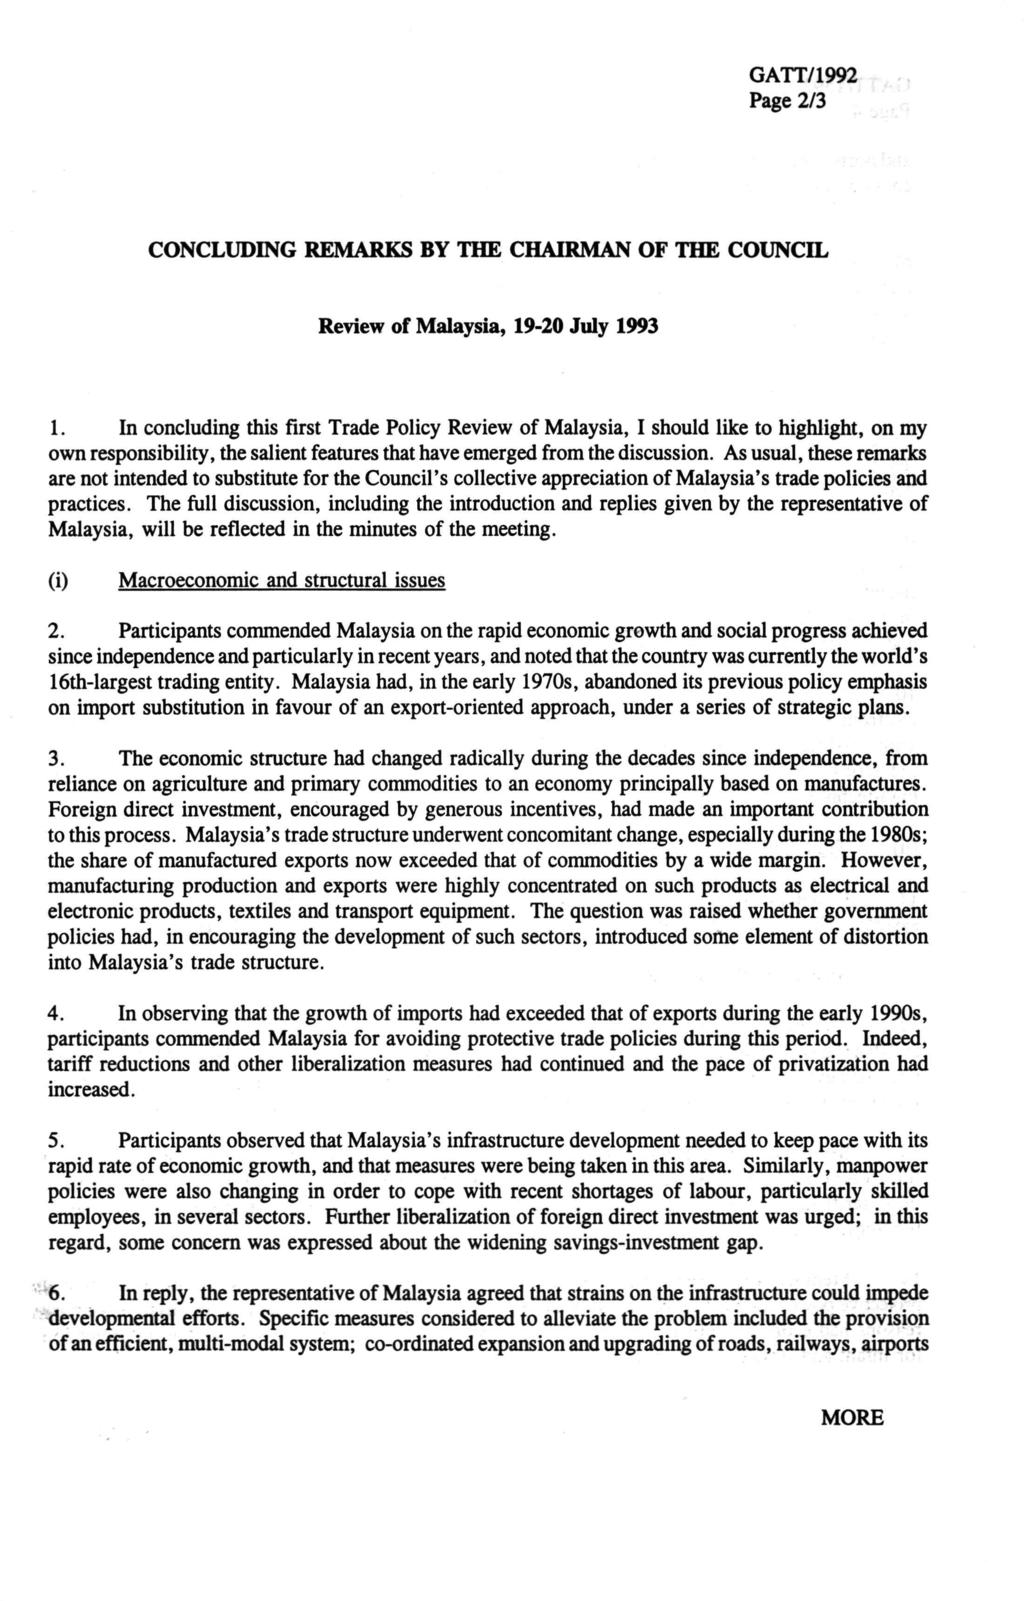 GATT/1992 Page 2/3 CONCLUDING REMARKS BY THE CHAIRMAN OF THE COUNCIL Review of Malaysia, 19-20 July 1993 1.